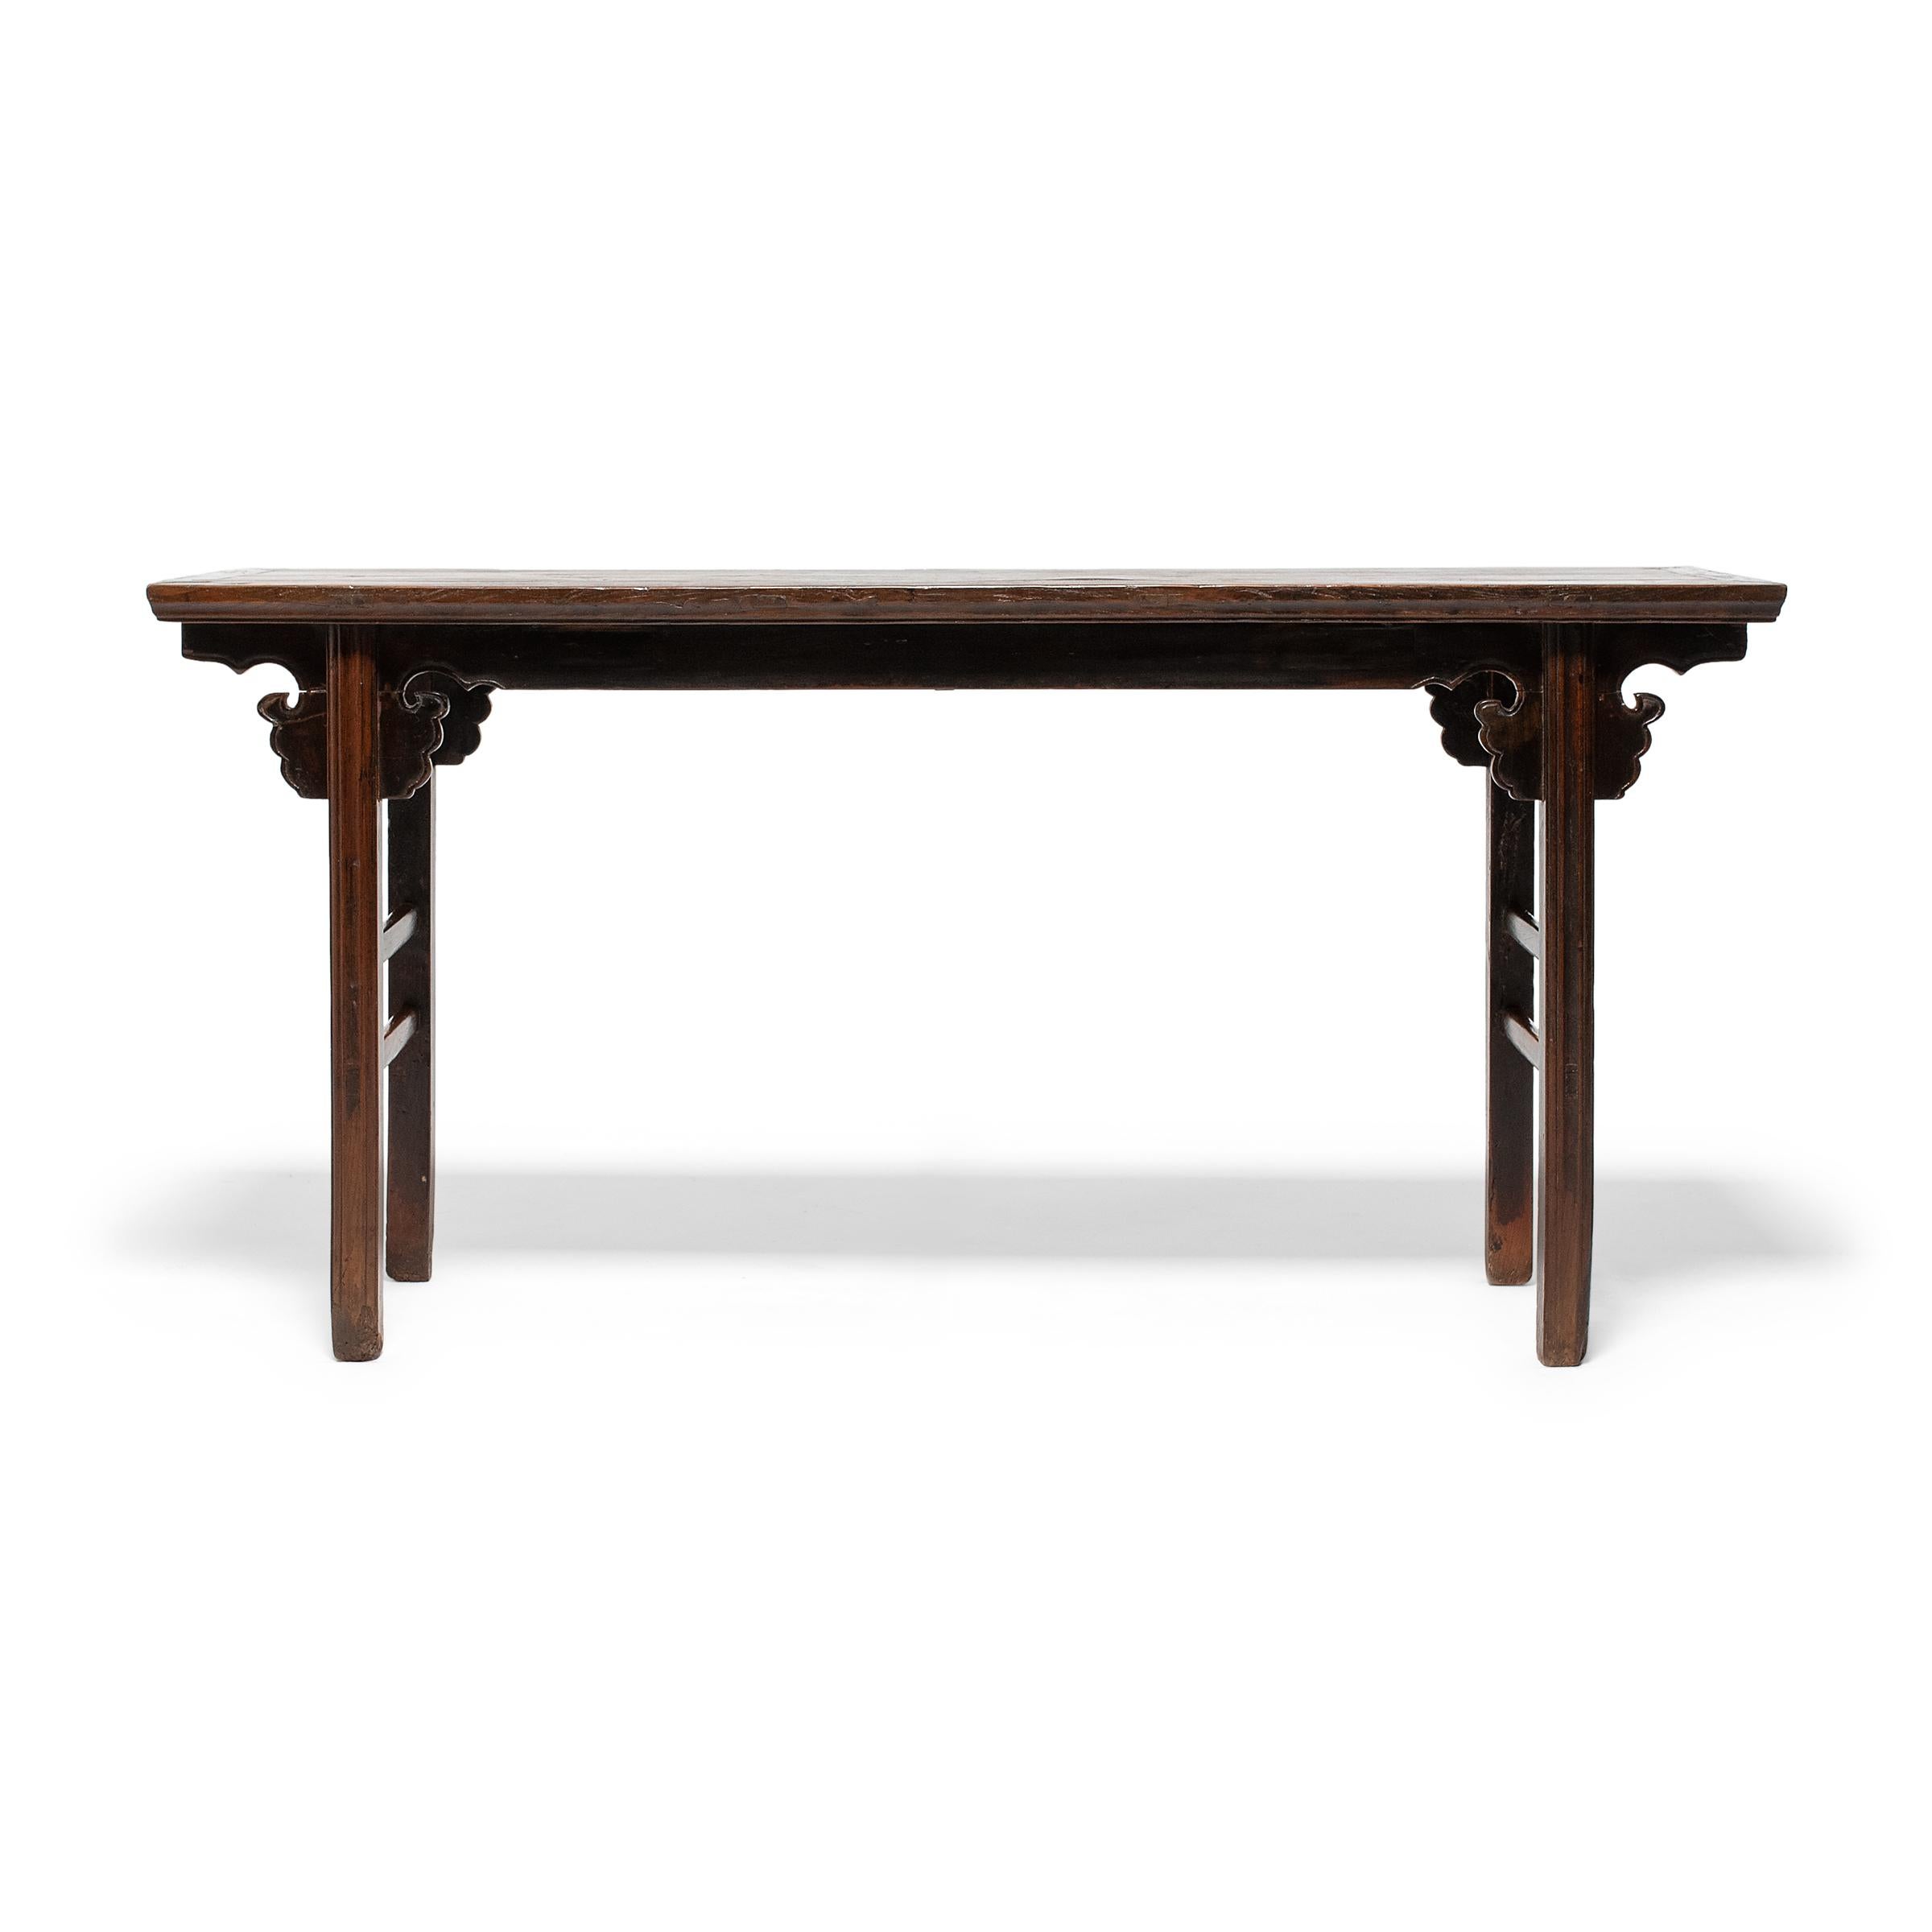 This late 19th-century offering table from Beijing expresses Ming-dynasty tastes with clean lines and a simple silhouette. Minimally decorated, the table features straight legs, double stretchers, and spandrels carved in the form of an auspicious